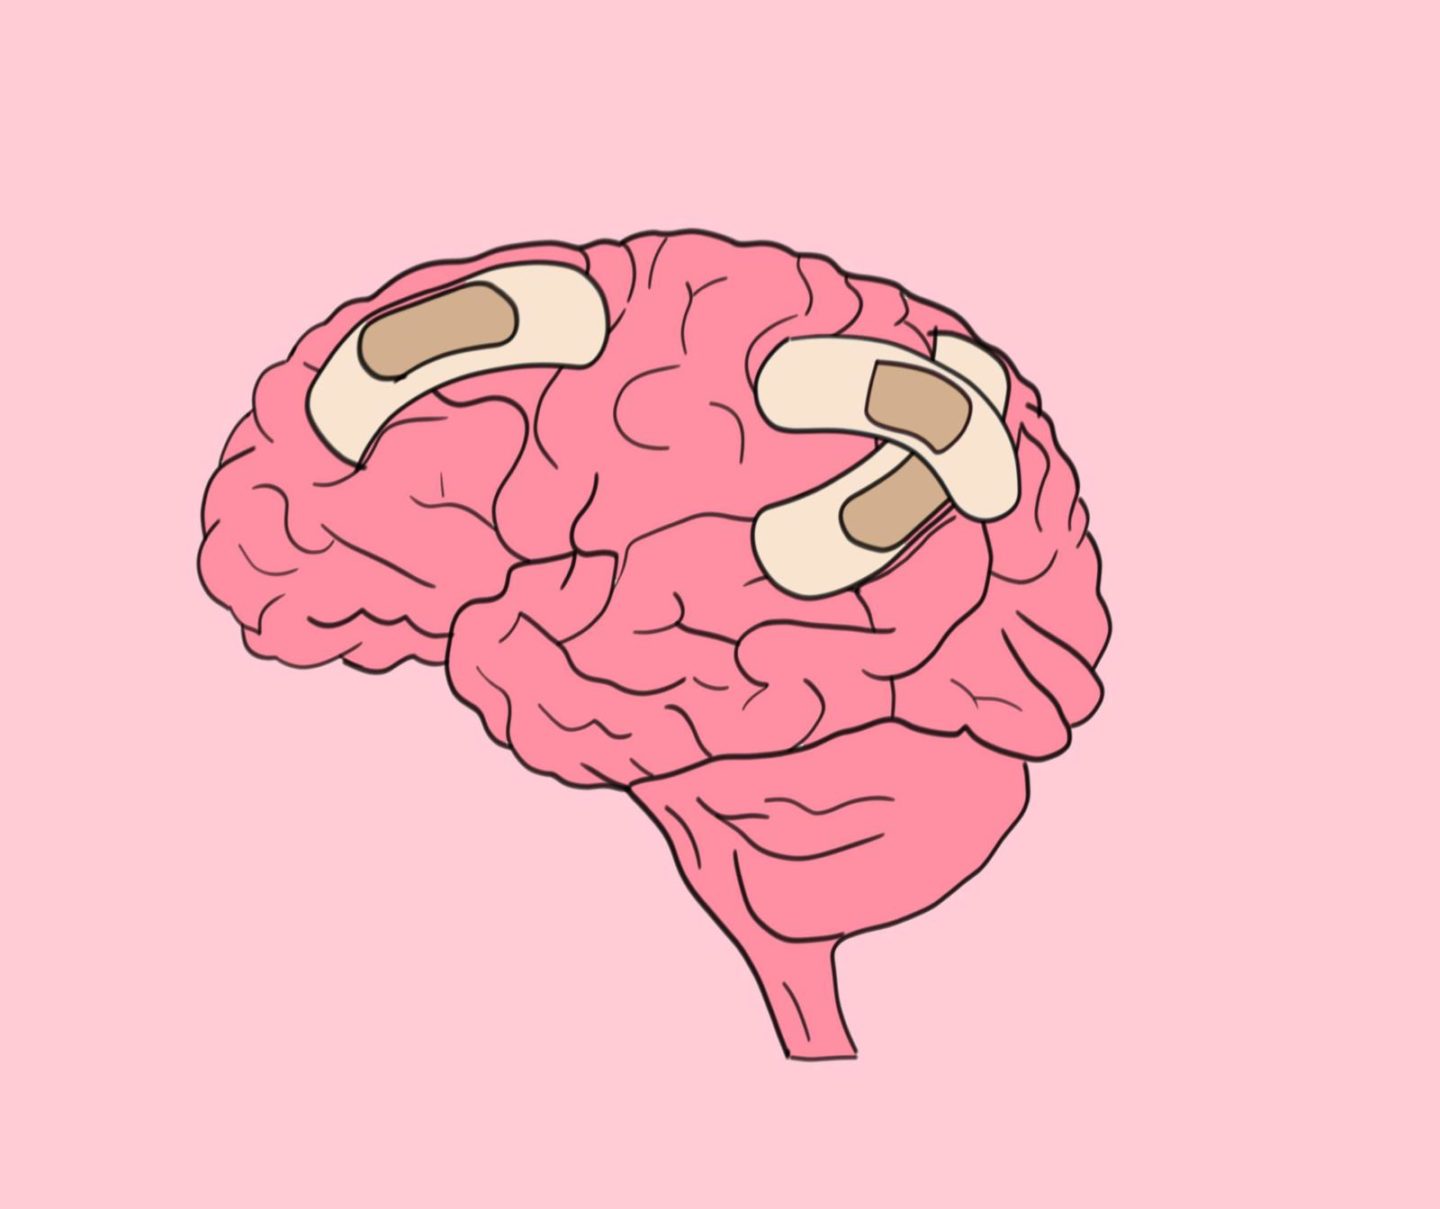 A brain with band aims from someone understanding trauma it's been through